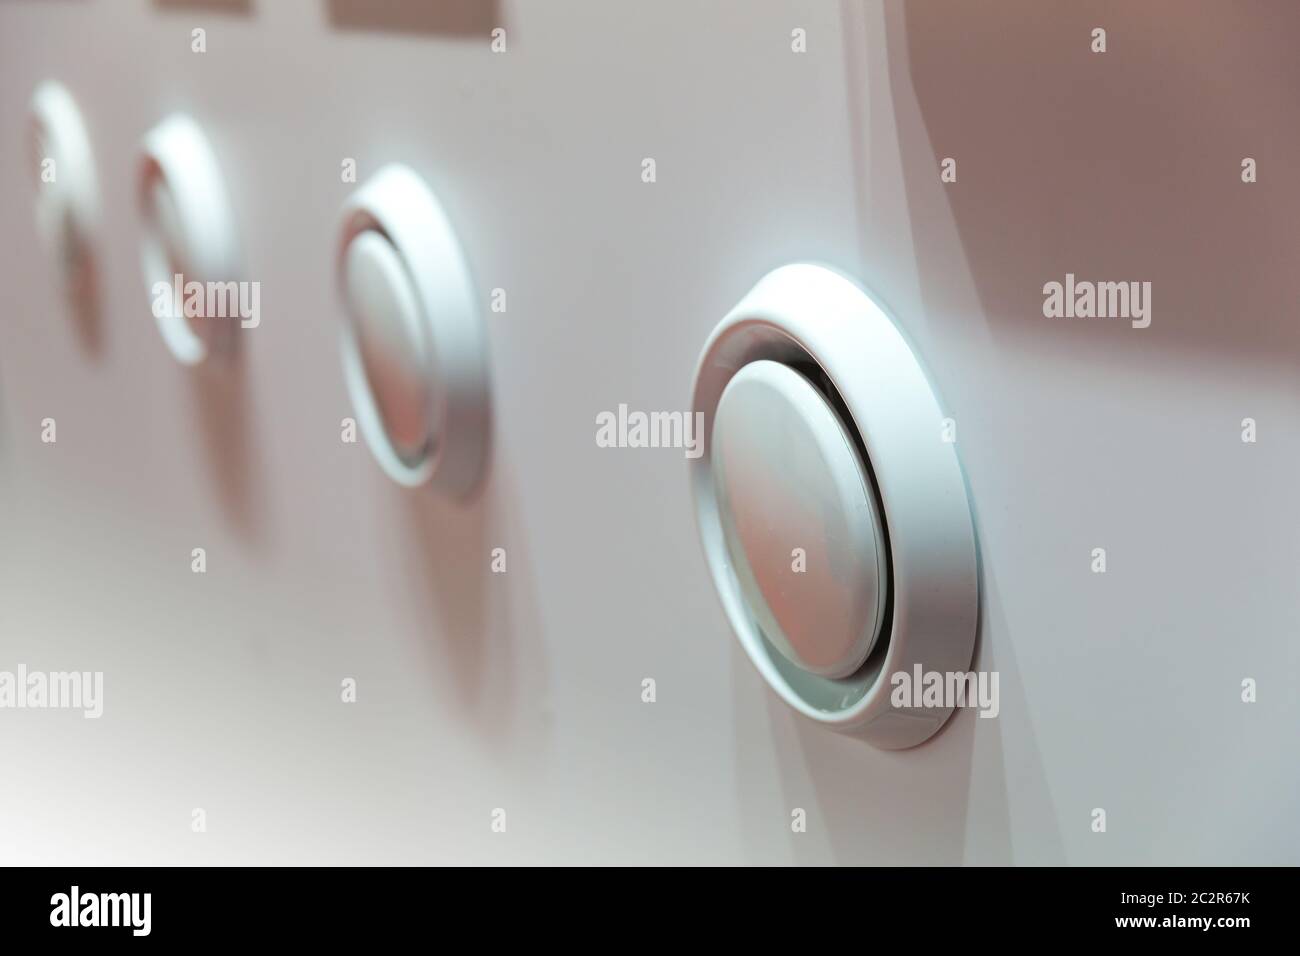 Showcase with plastic covers for air vents closeup. Forced ventilation for bathroom, kitchen or house rooms Stock Photo